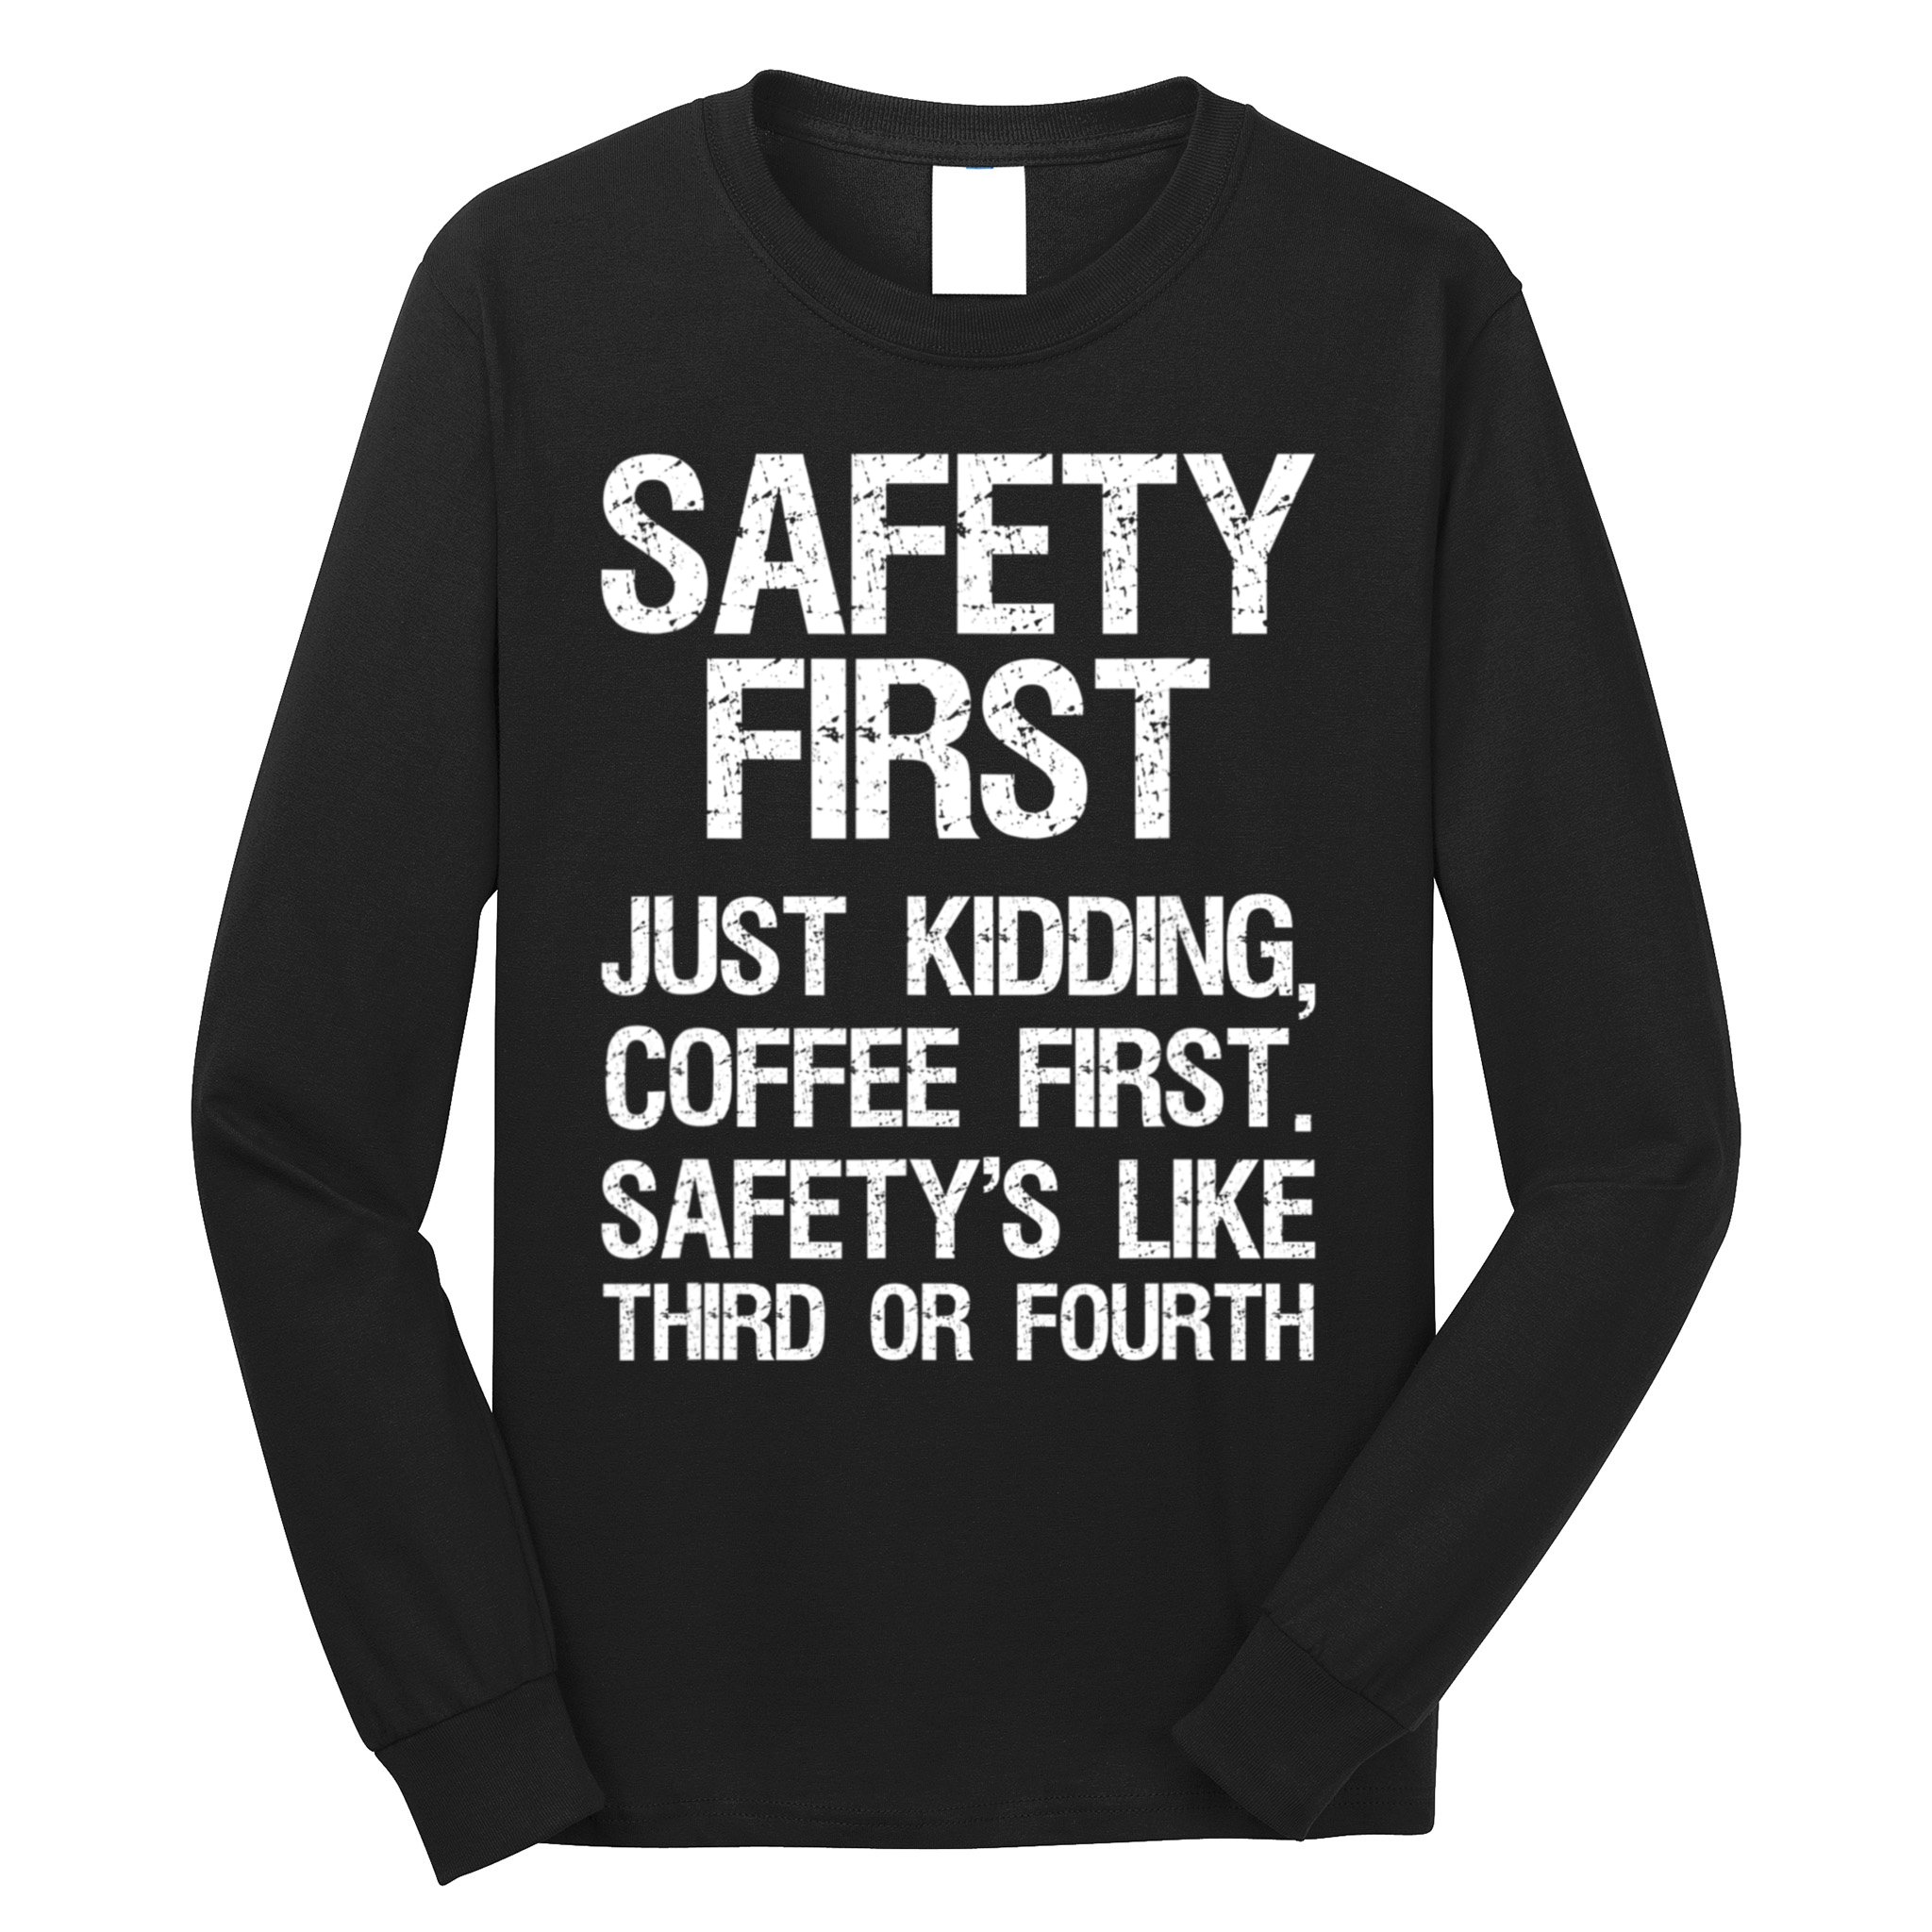 Safety First Just Kidding Coffee First Funny Sayings Long Sleeve Shirt